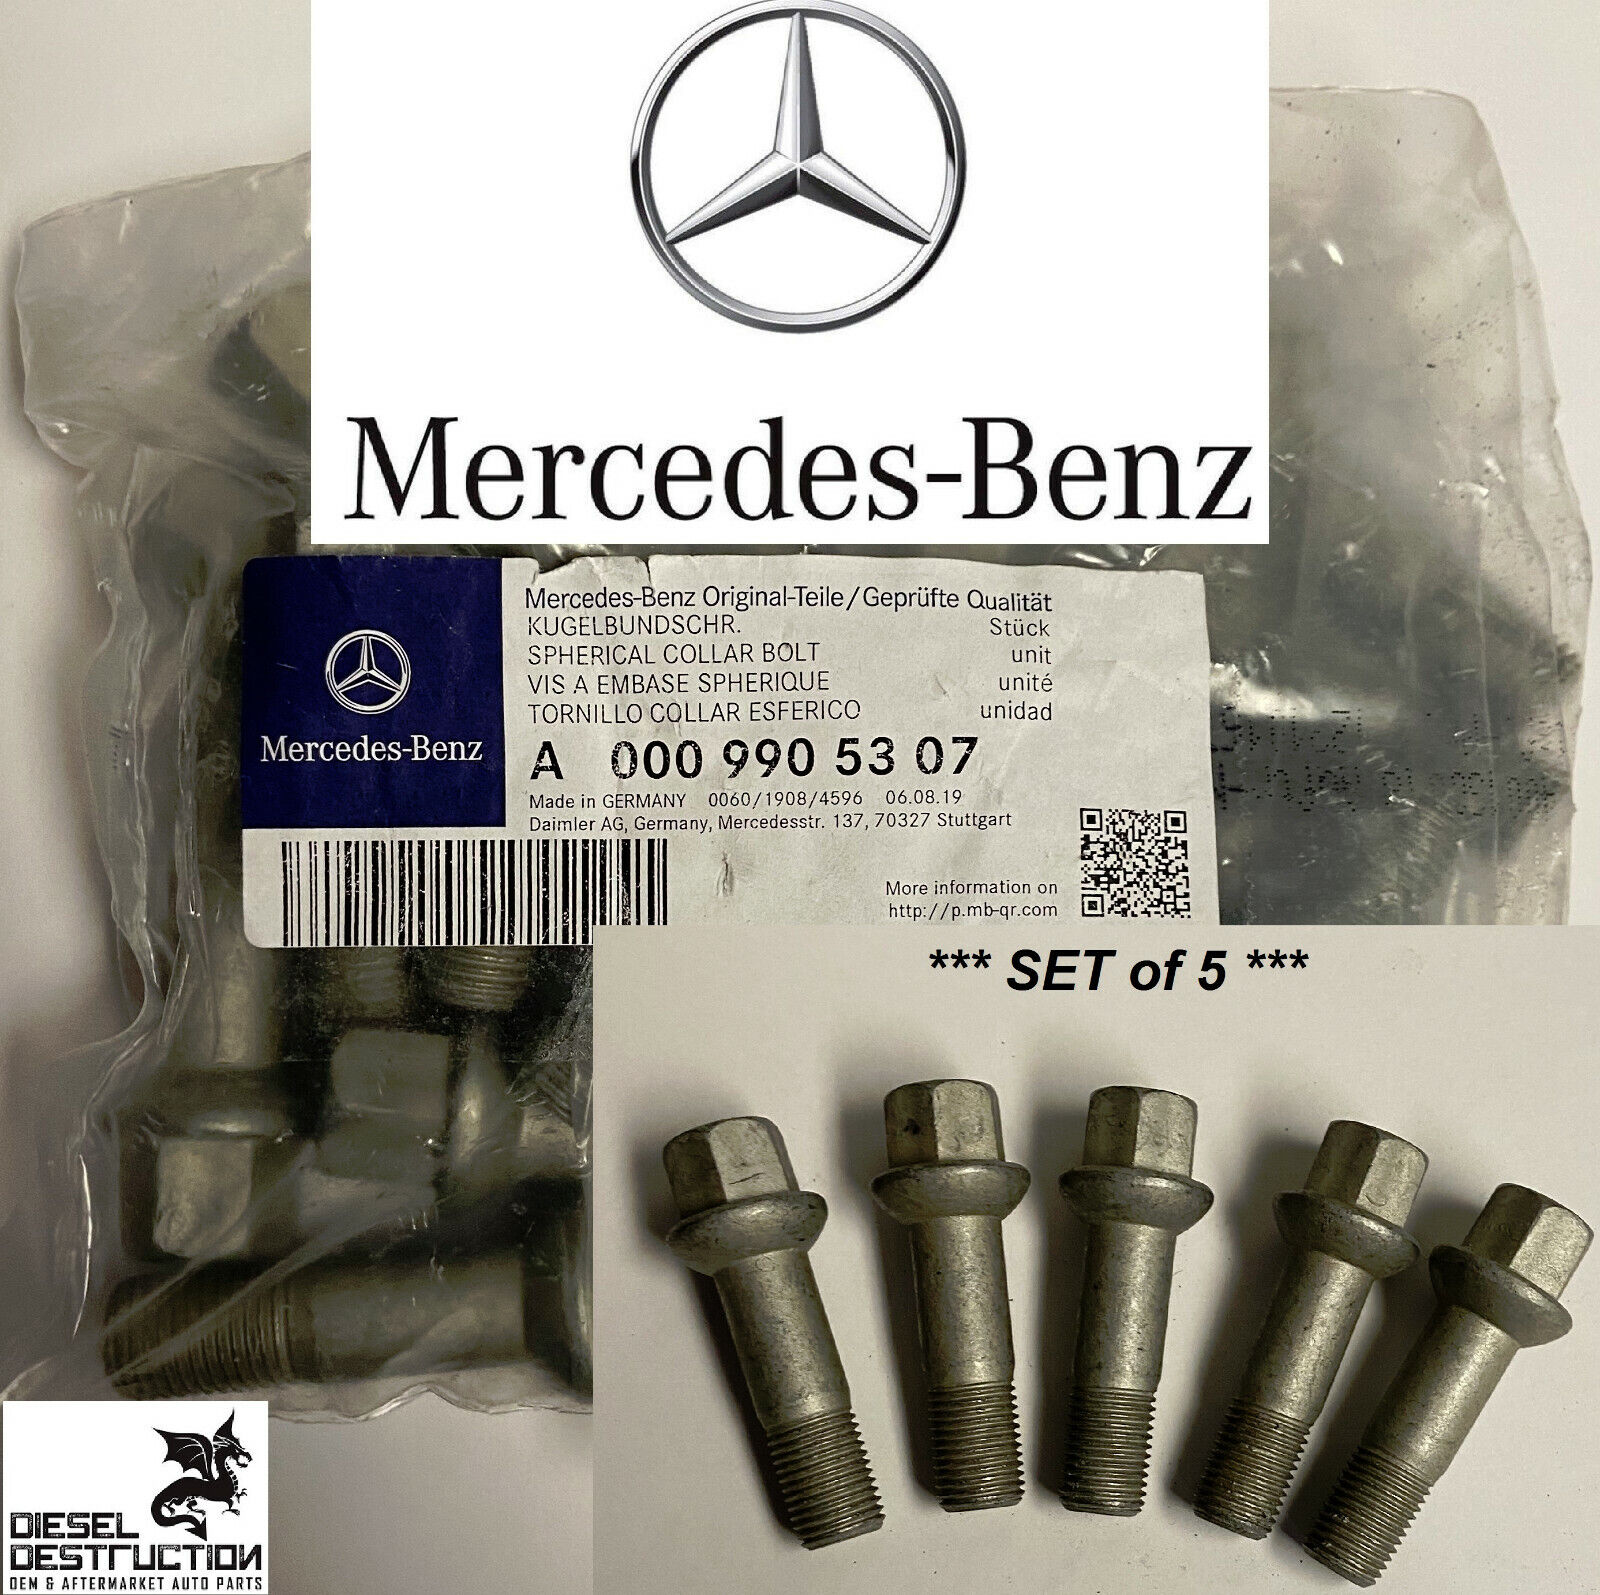 5PCS OEM# 000-990-53-07 Genuine Mercedes Benz Wheel Bolts Made in Germany